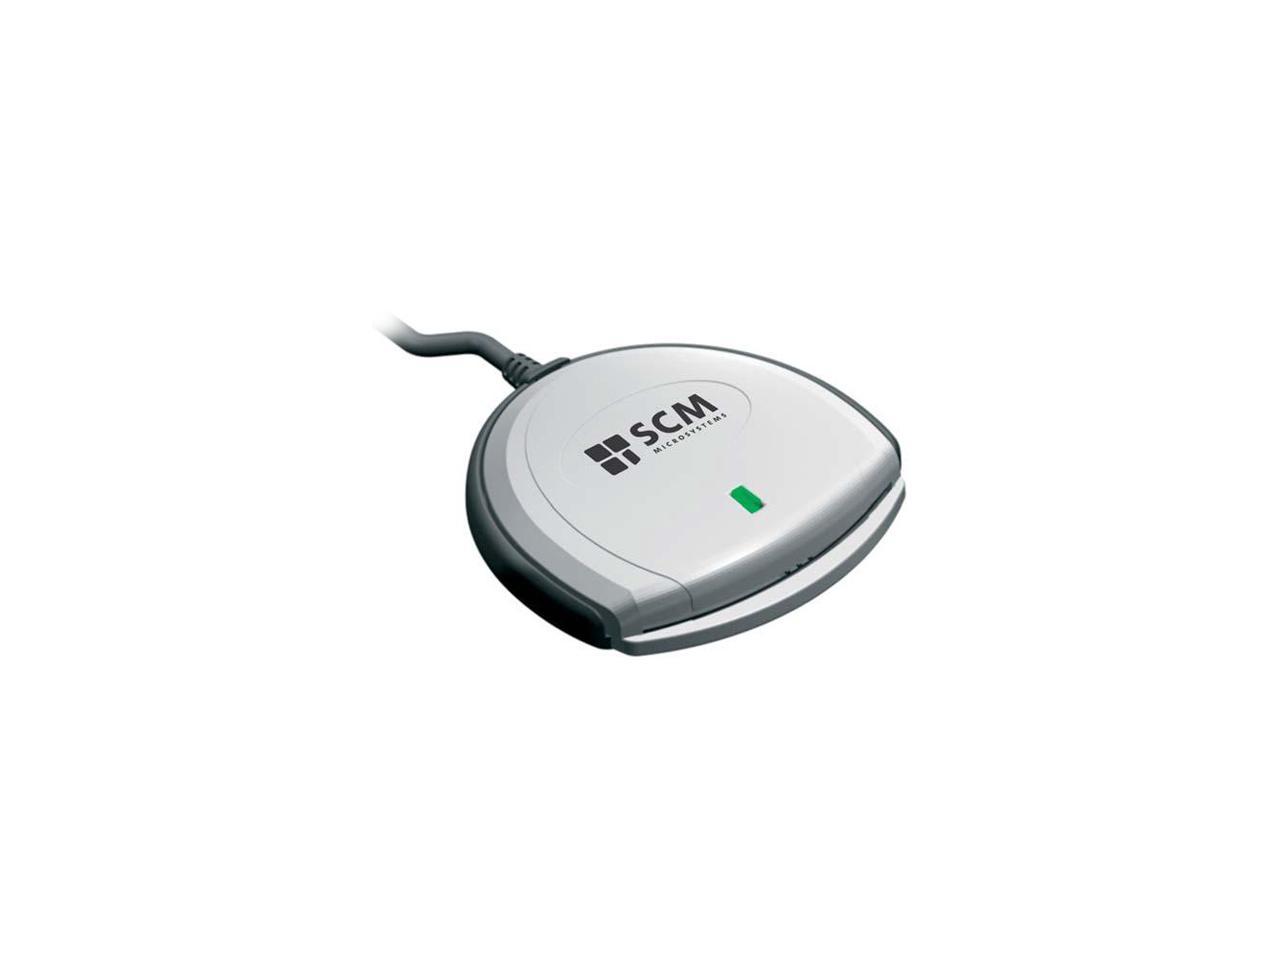 mac driver for scr-3310 reader